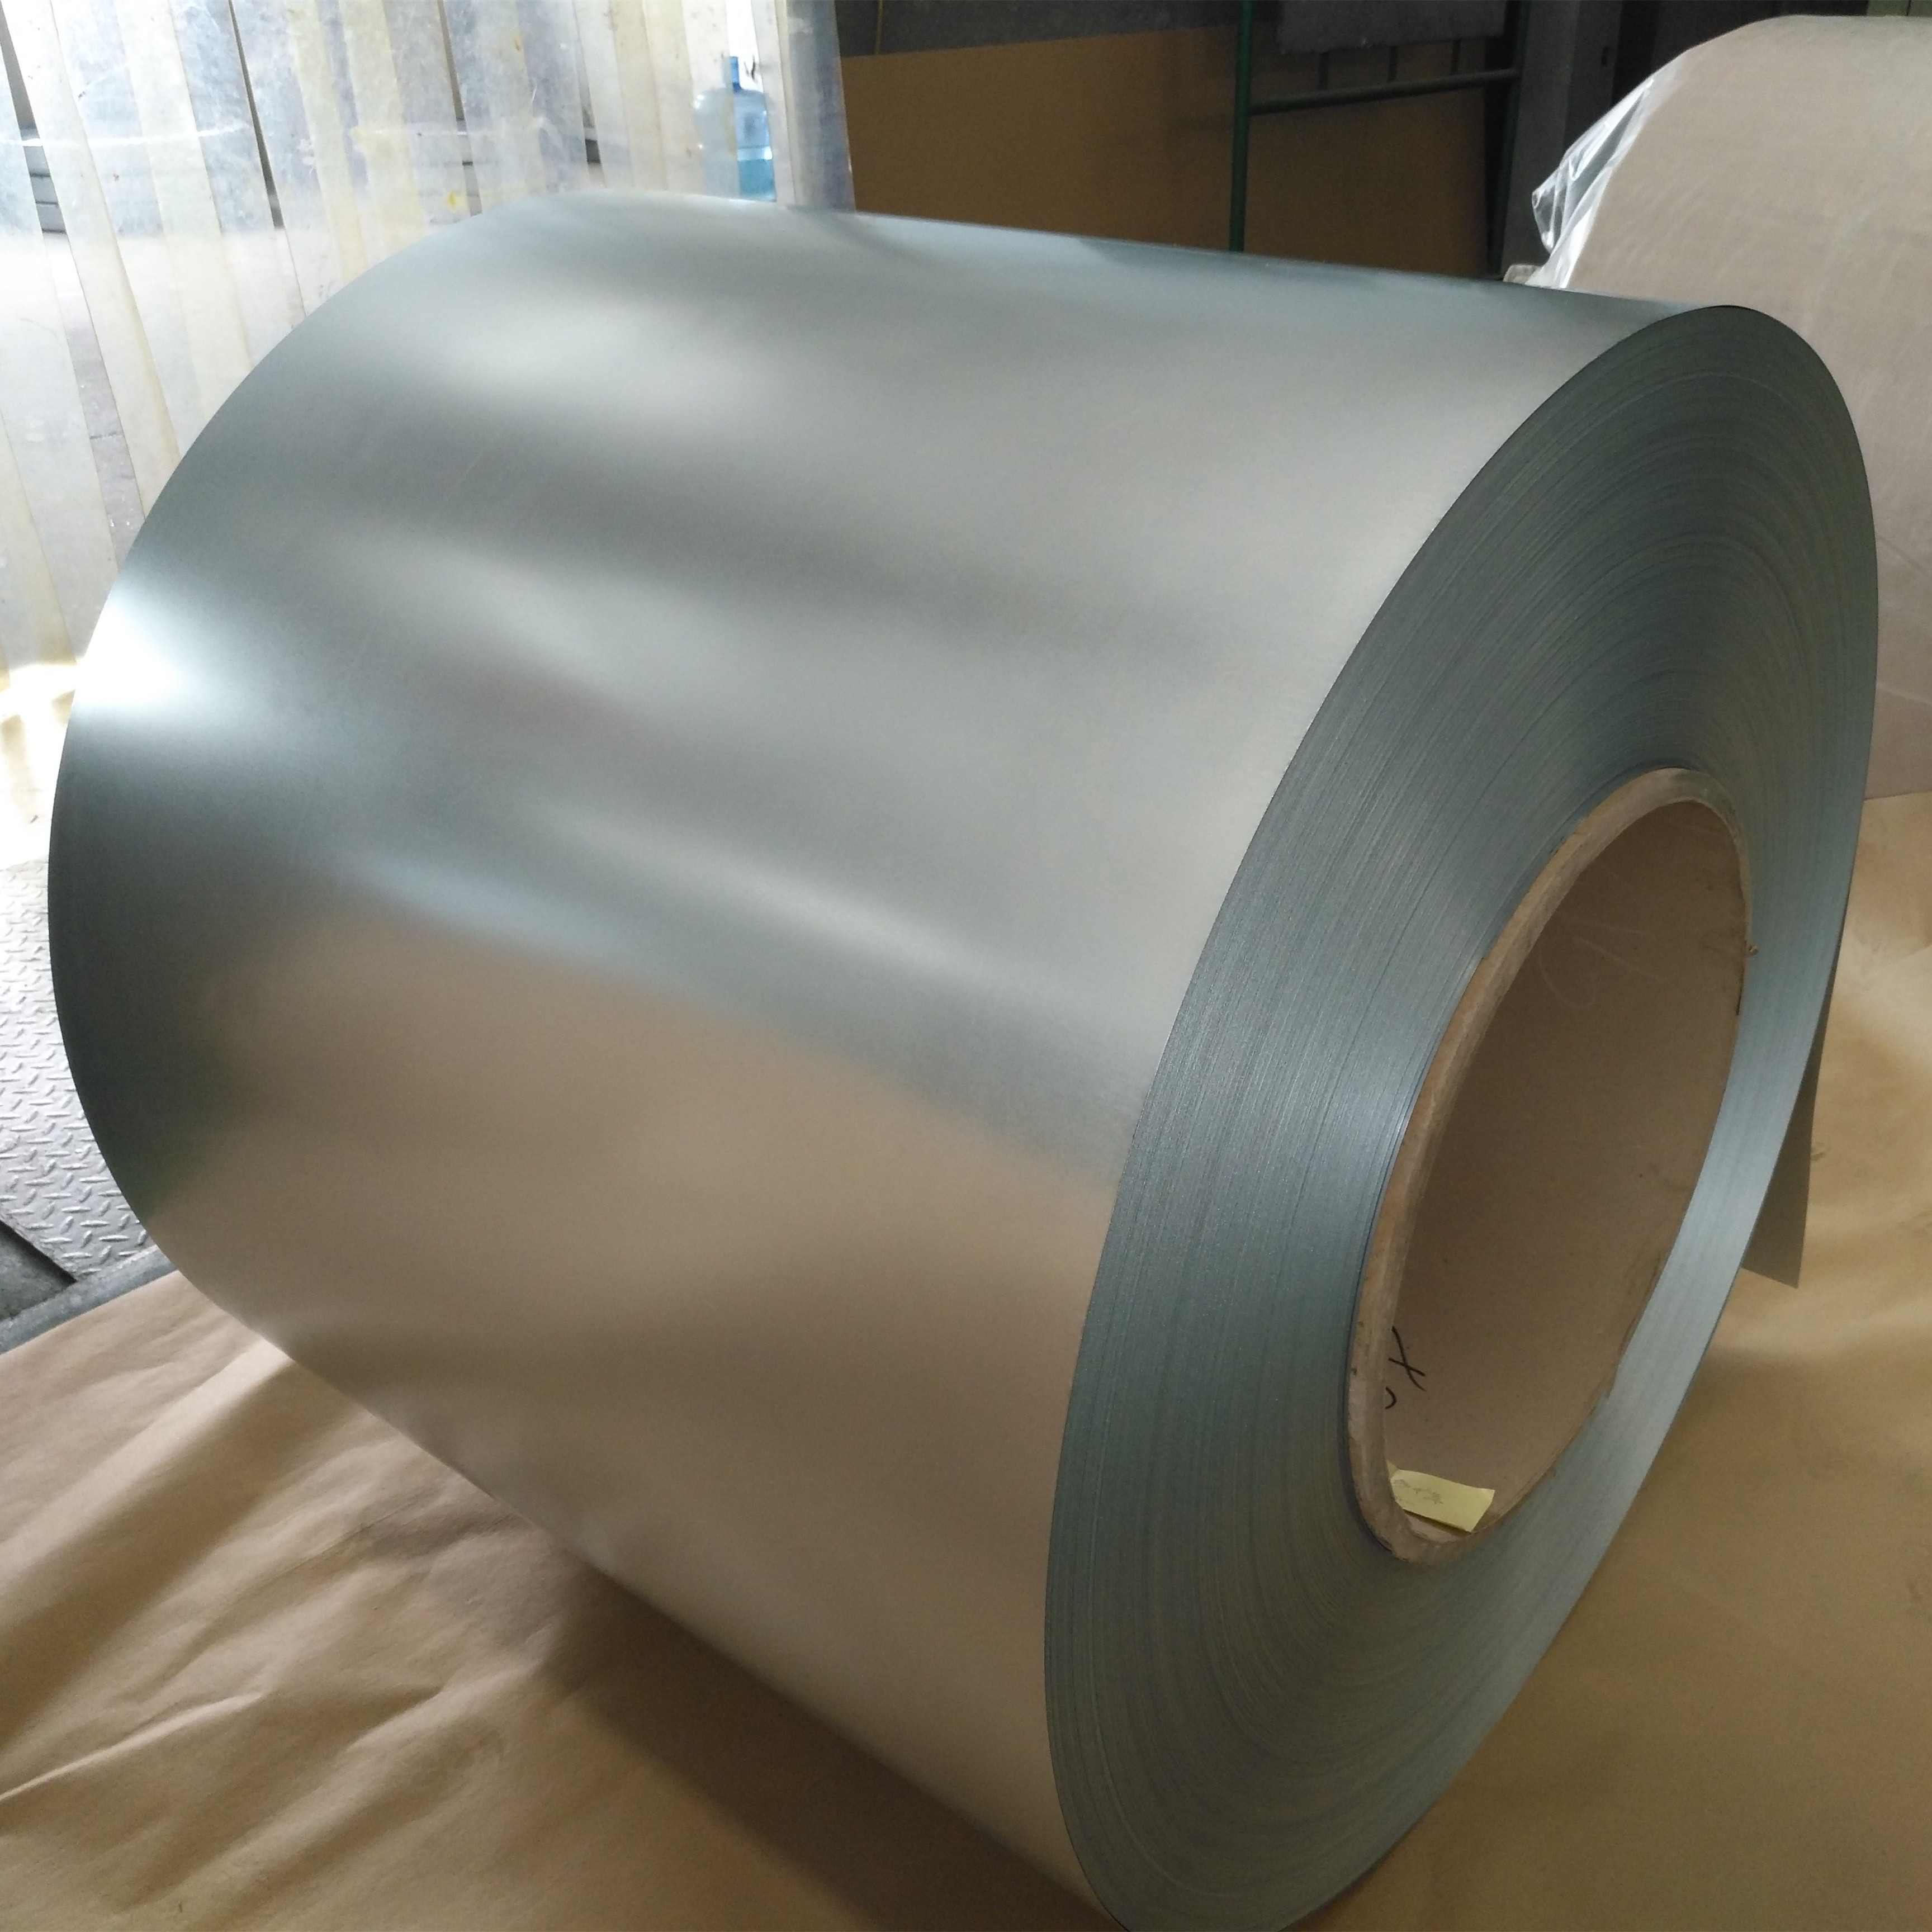 Cross-border dedicated for cutting galvanized sheet chemical equipment metal products container galvanized coil wholesale